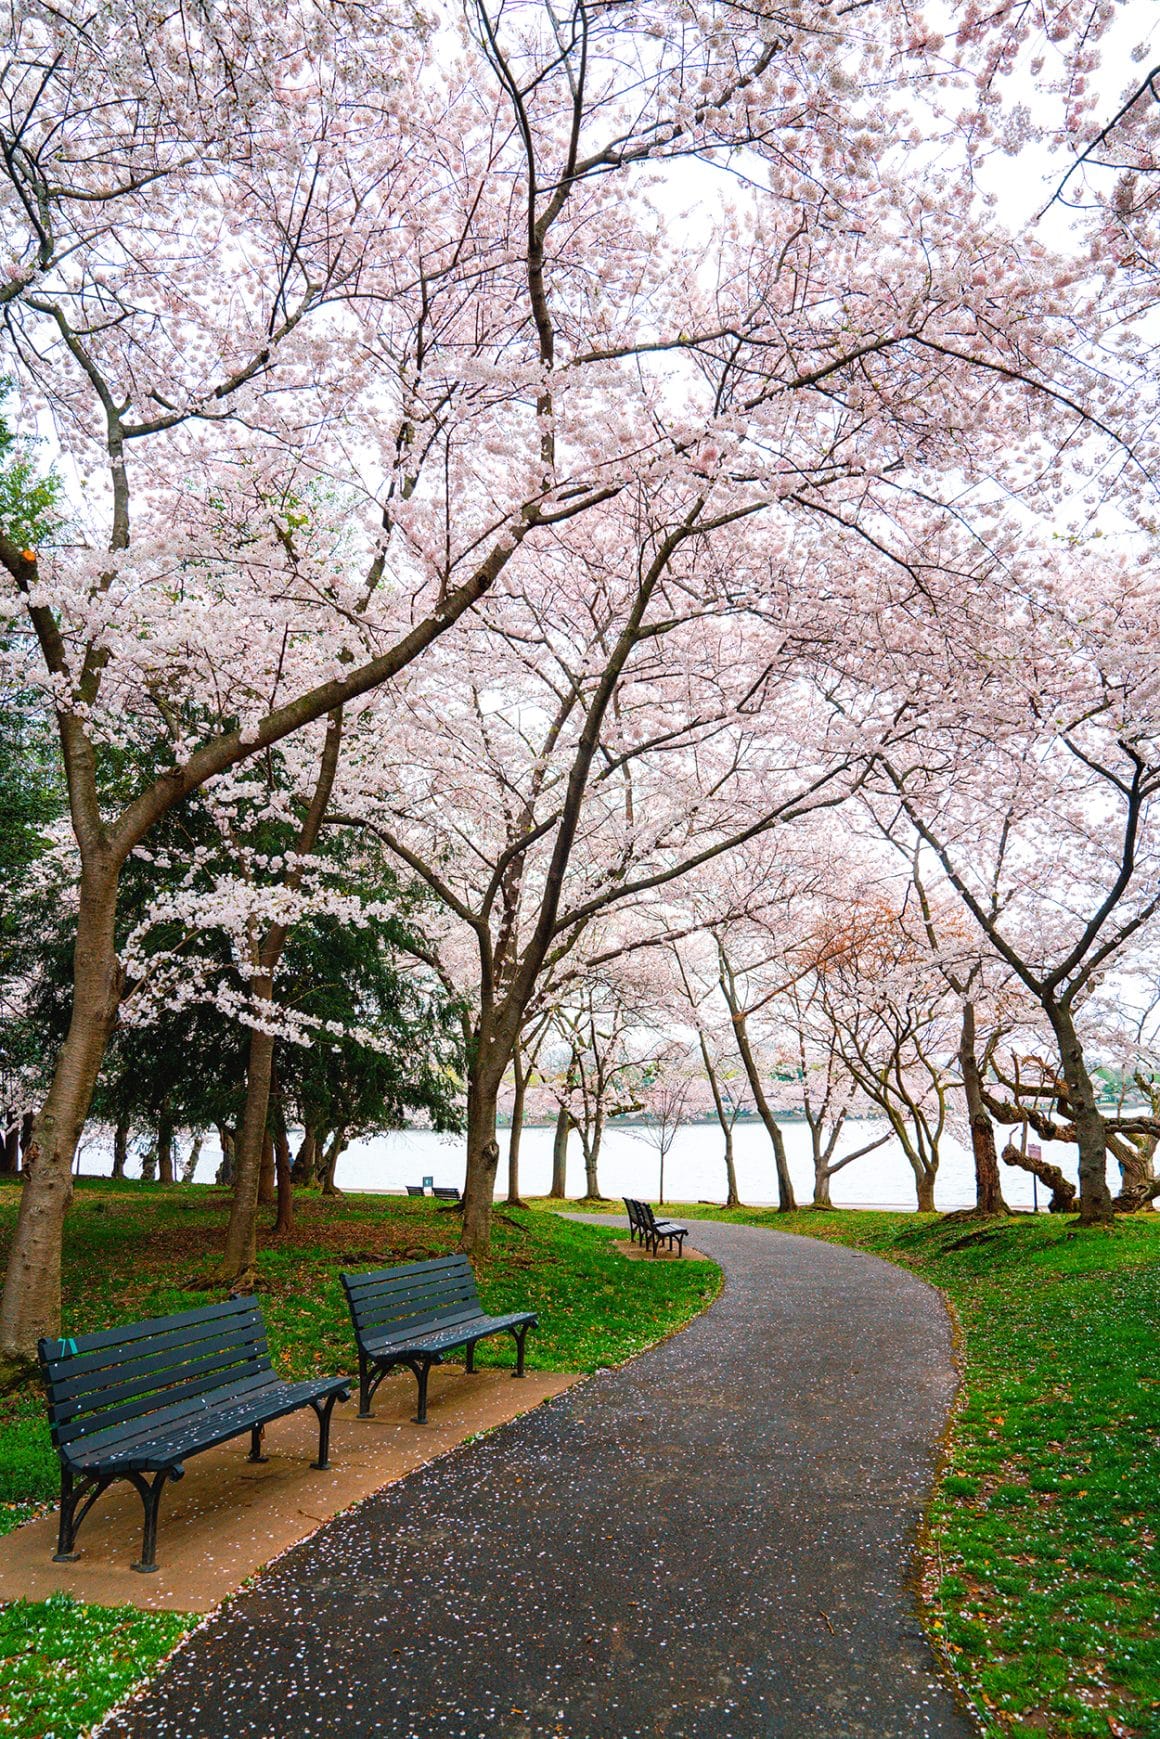 Walking path around the Tidal Basin in D.C. during cherry blossom peak bloom